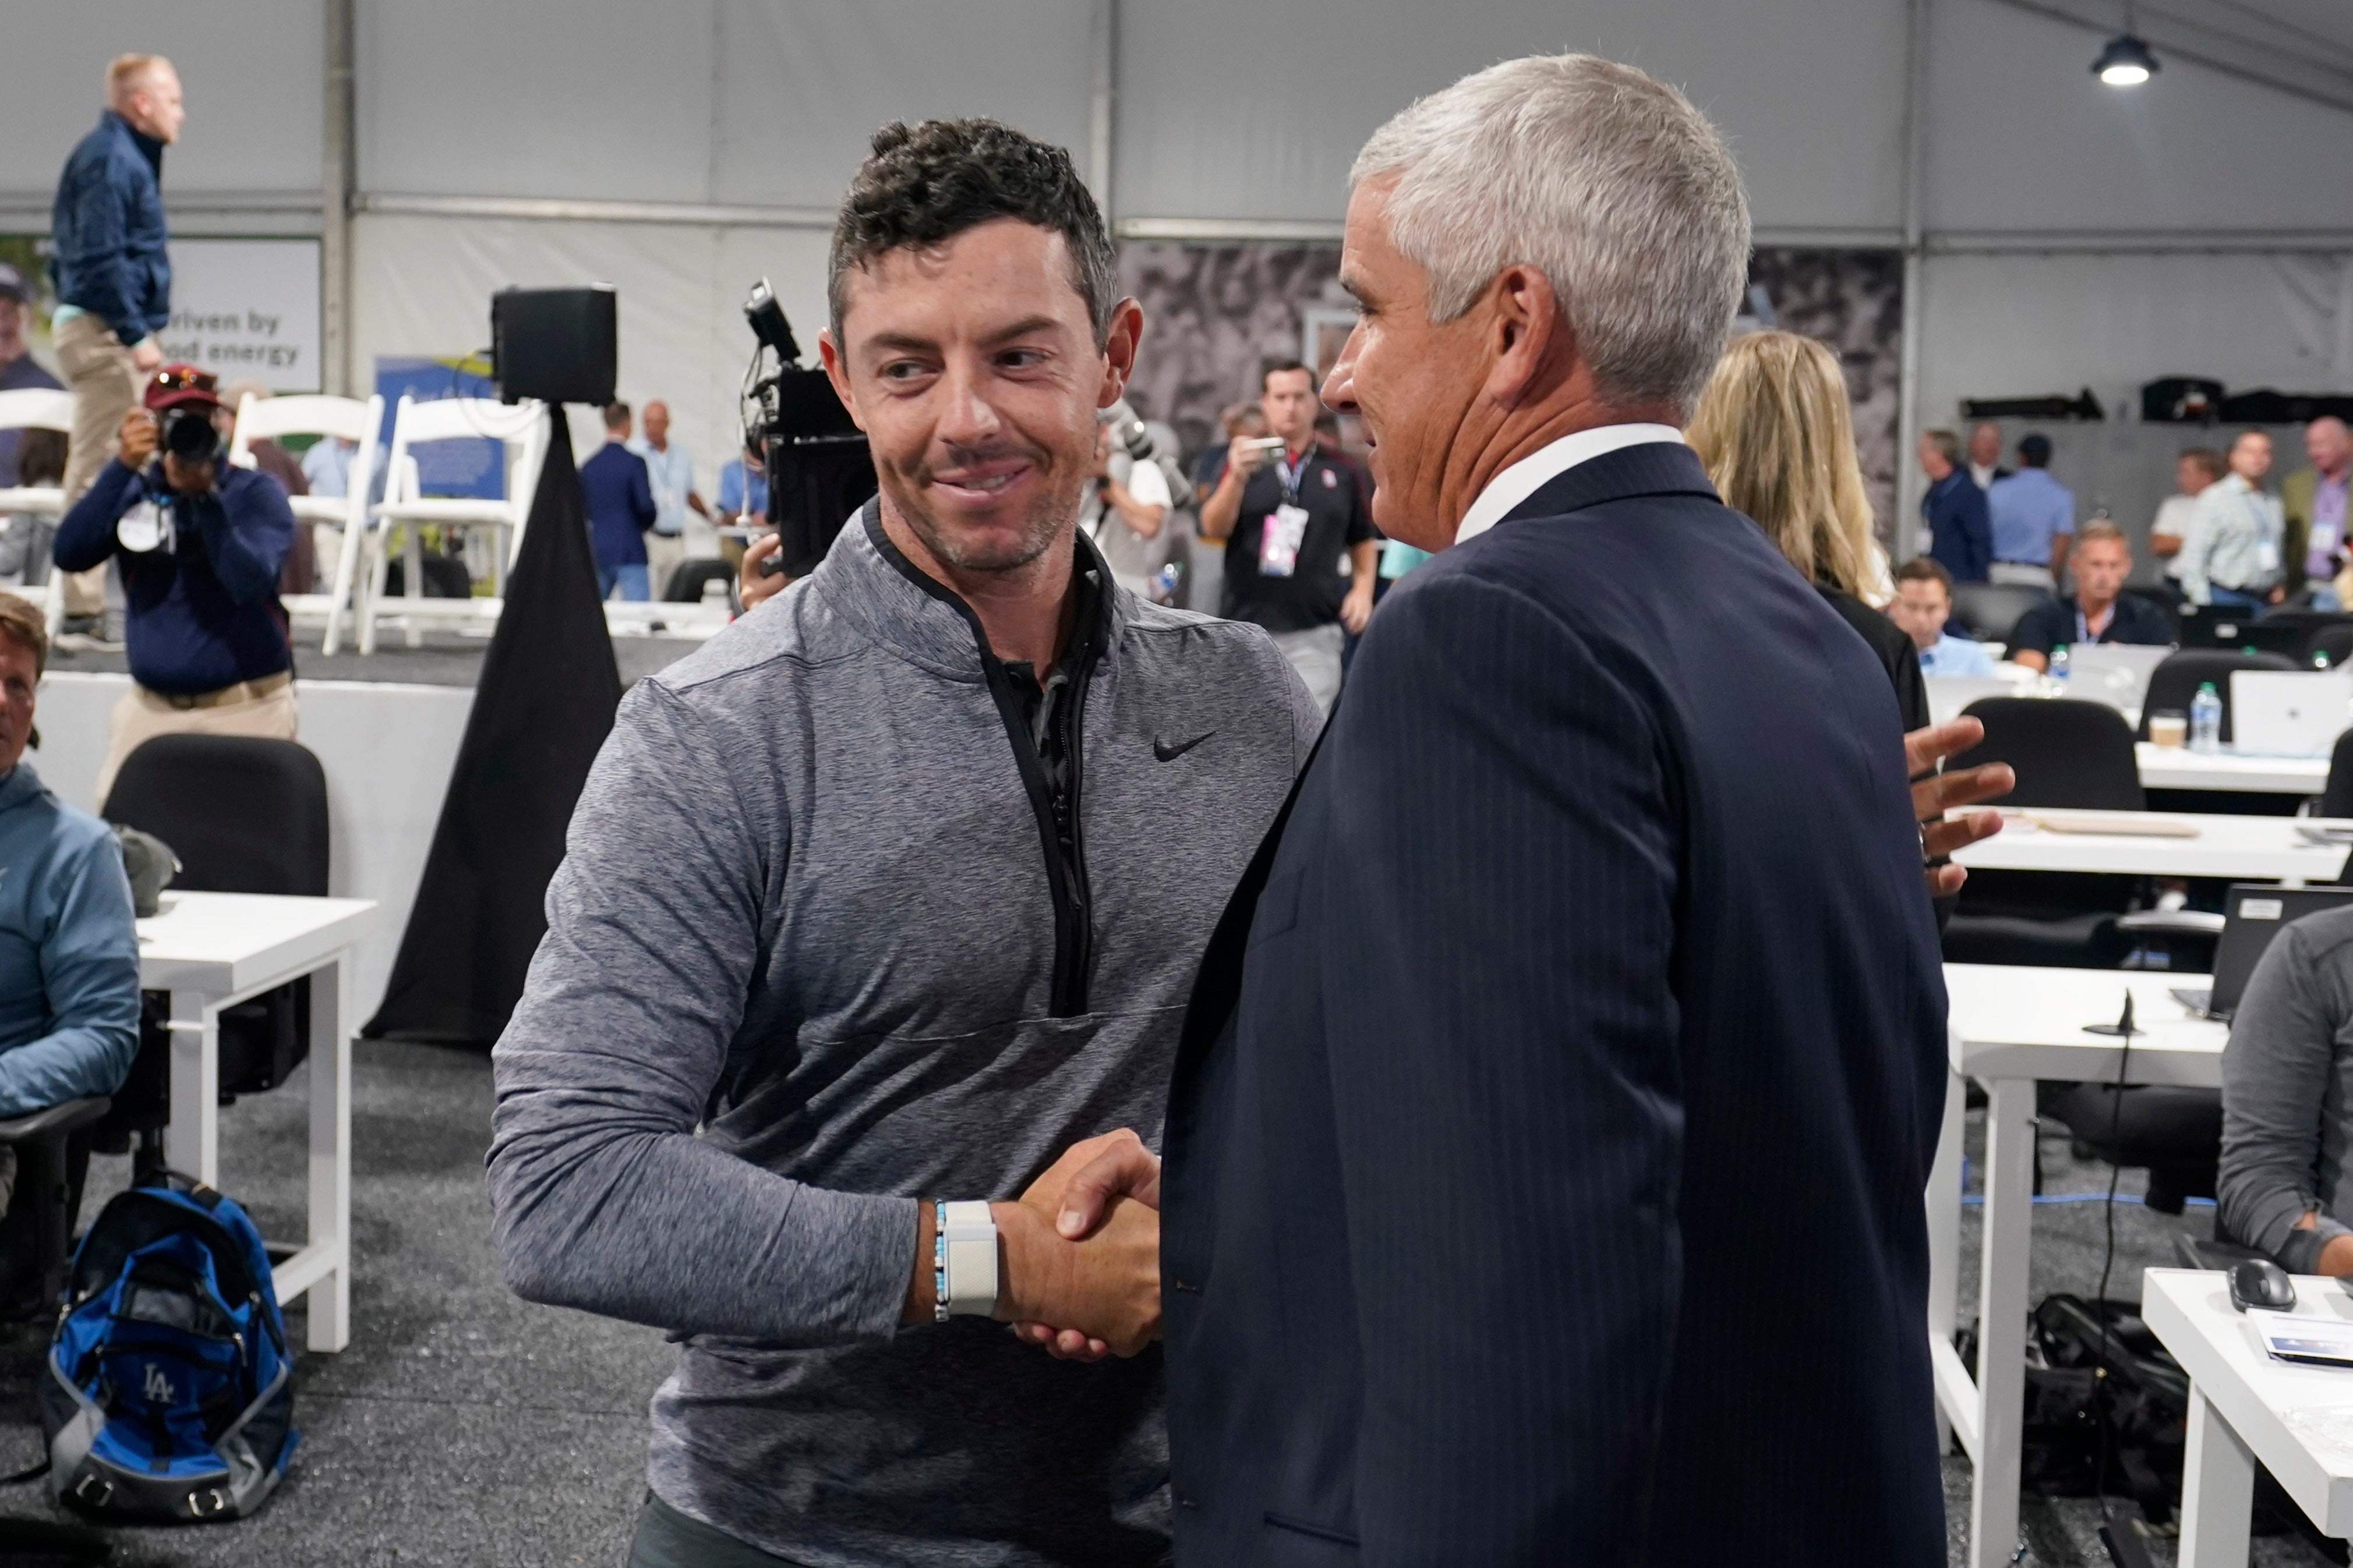 Rory McIlroy has been loyal to the PGA Tour and commissioner Jay Monahan throughout the civil war